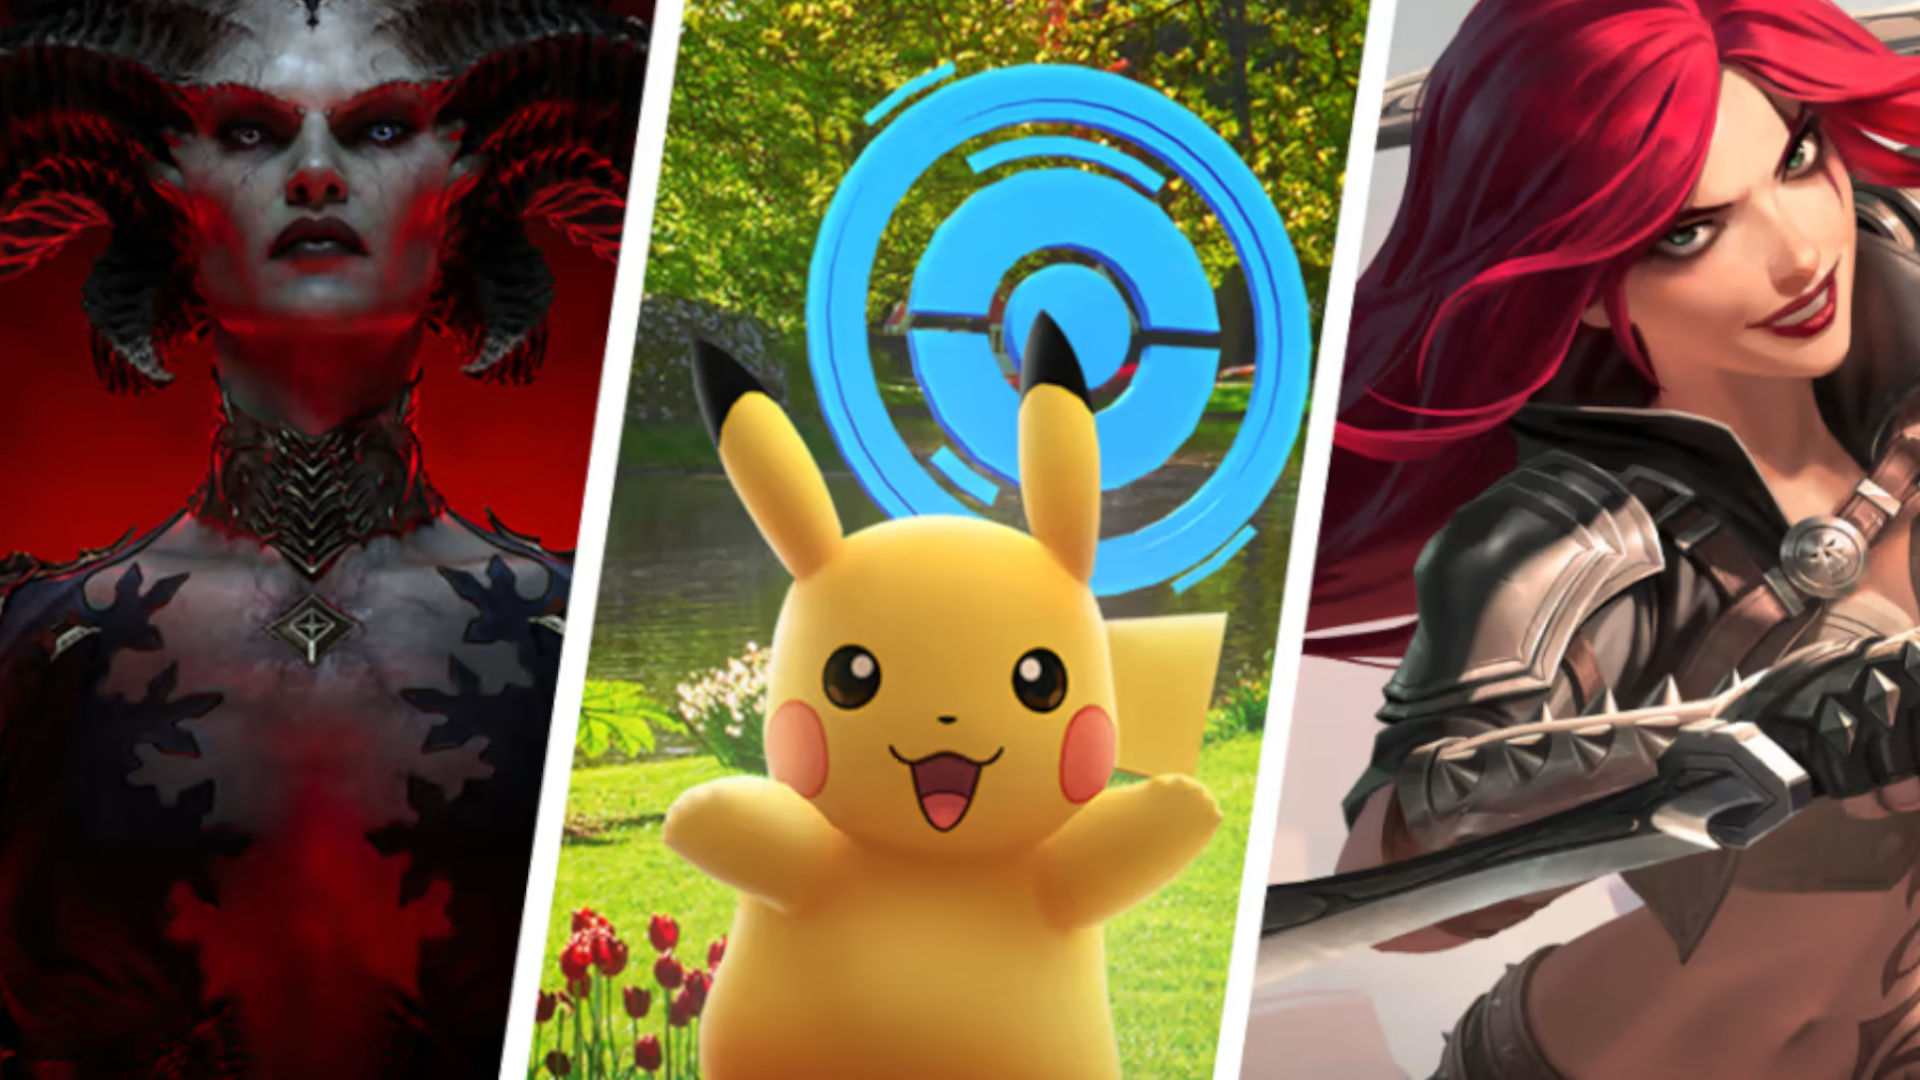 Prime Gaming August content packs a punch with nine games and